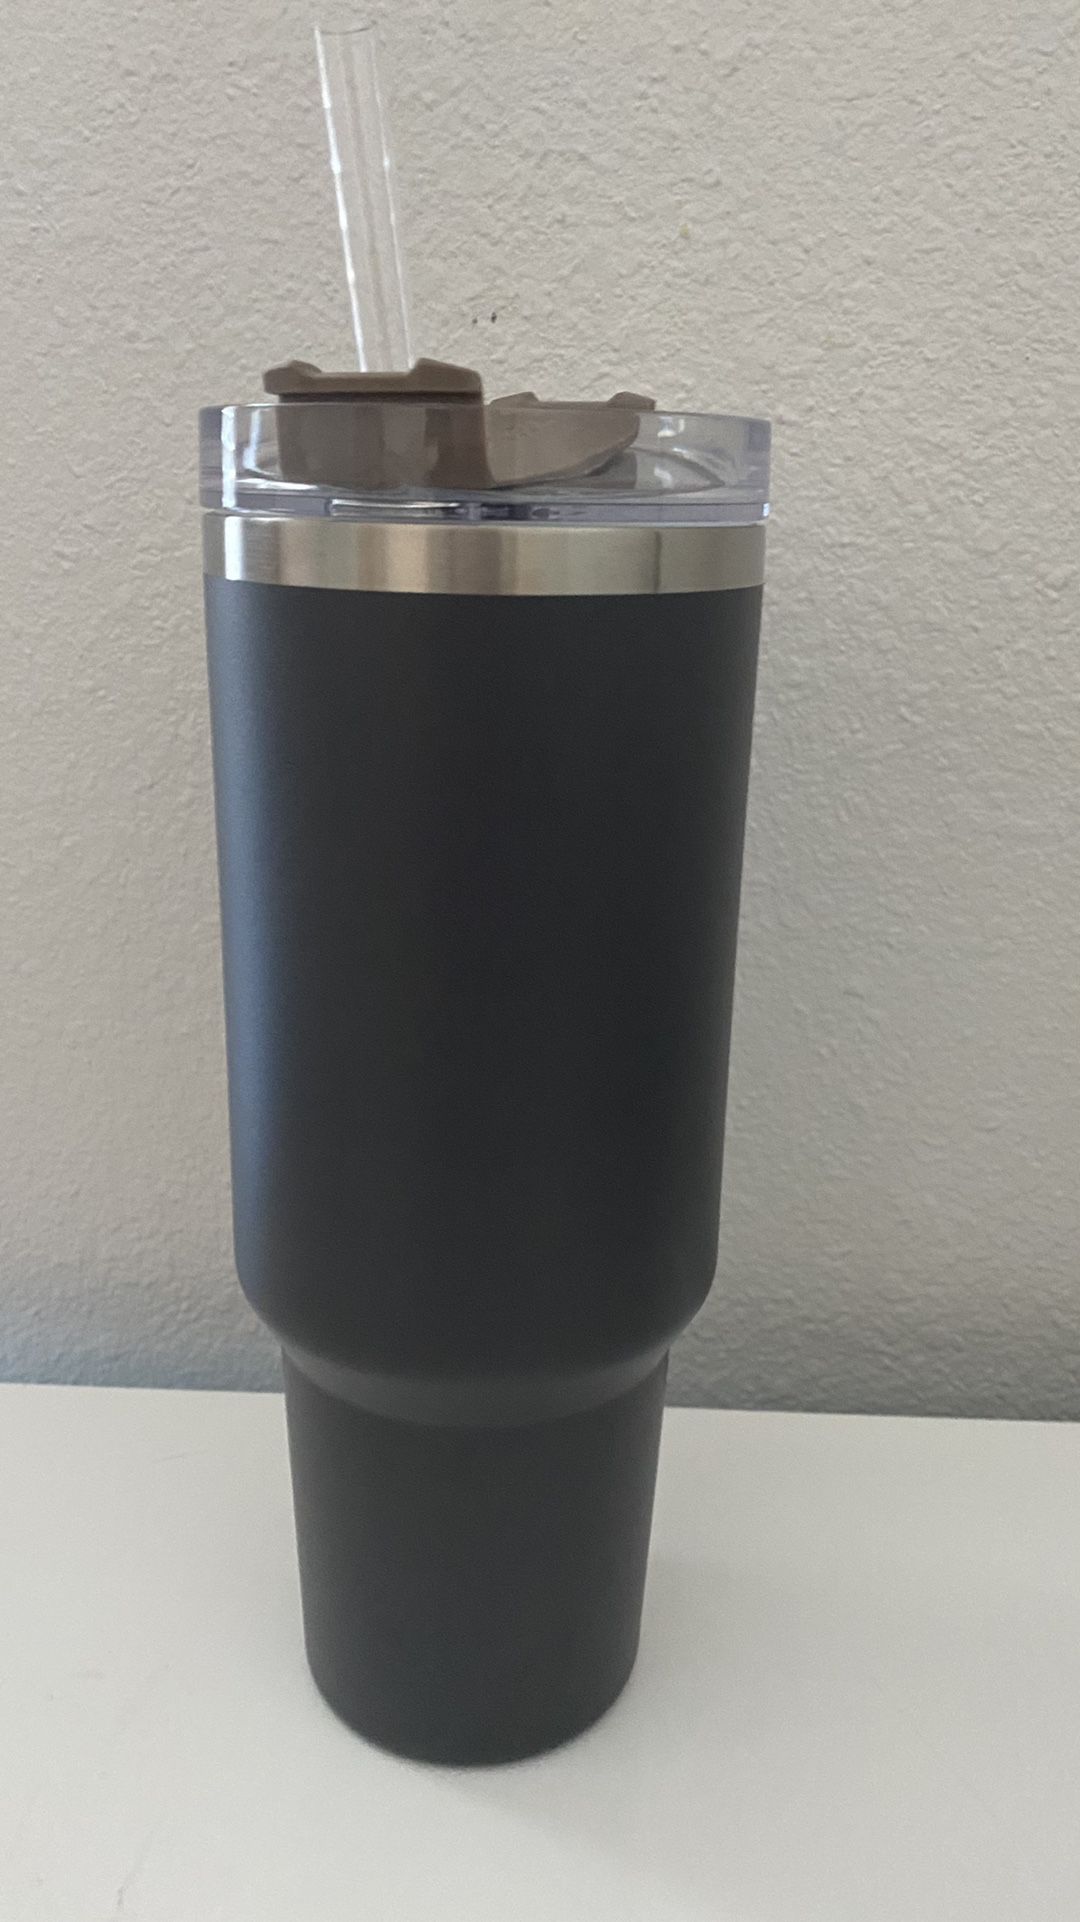 Stanley 30oz Quencher H2.0 FlowState Tumbler - Camelia for Sale in Buckeye,  AZ - OfferUp